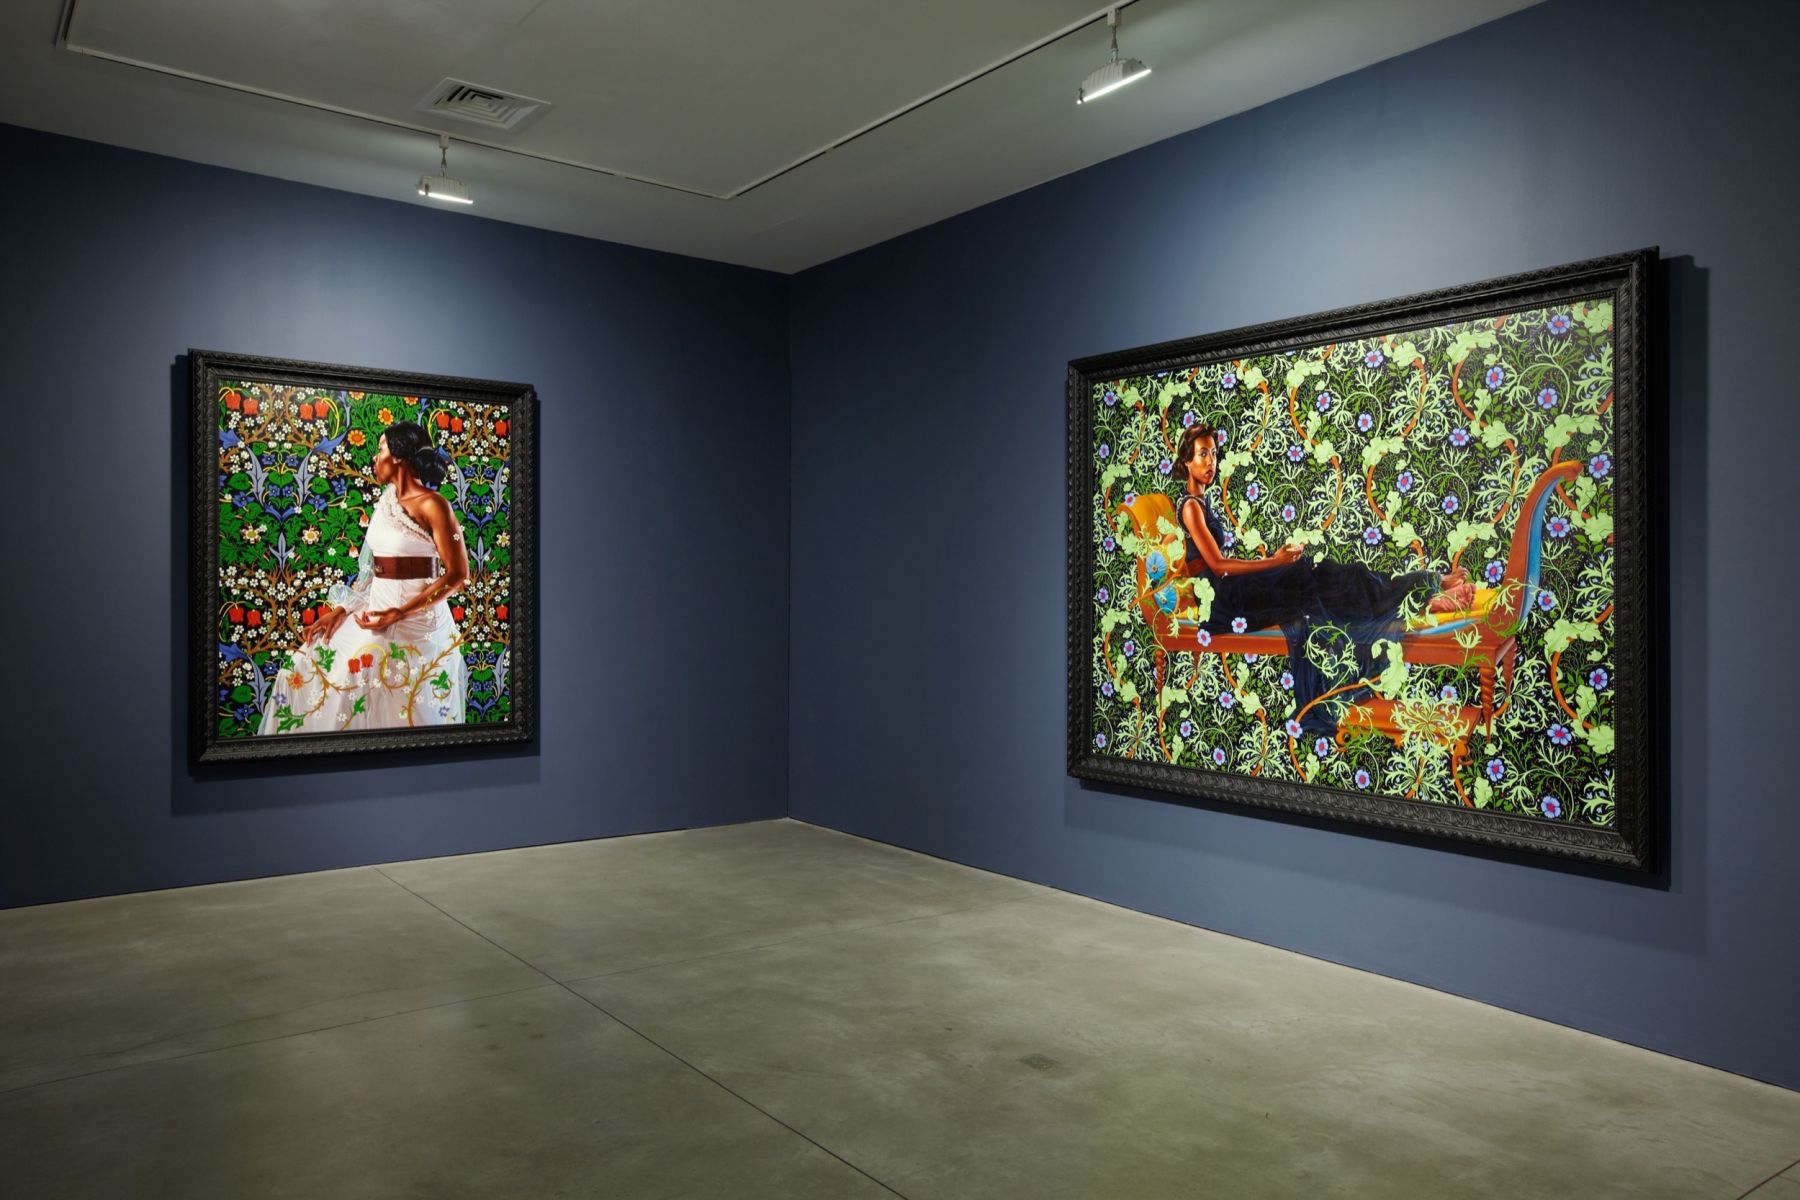 Kehinde Wiley | An Economy of Grace, Sean Kelly Gallery, New York City, USA, May 6 - June 16, 2012 | 6